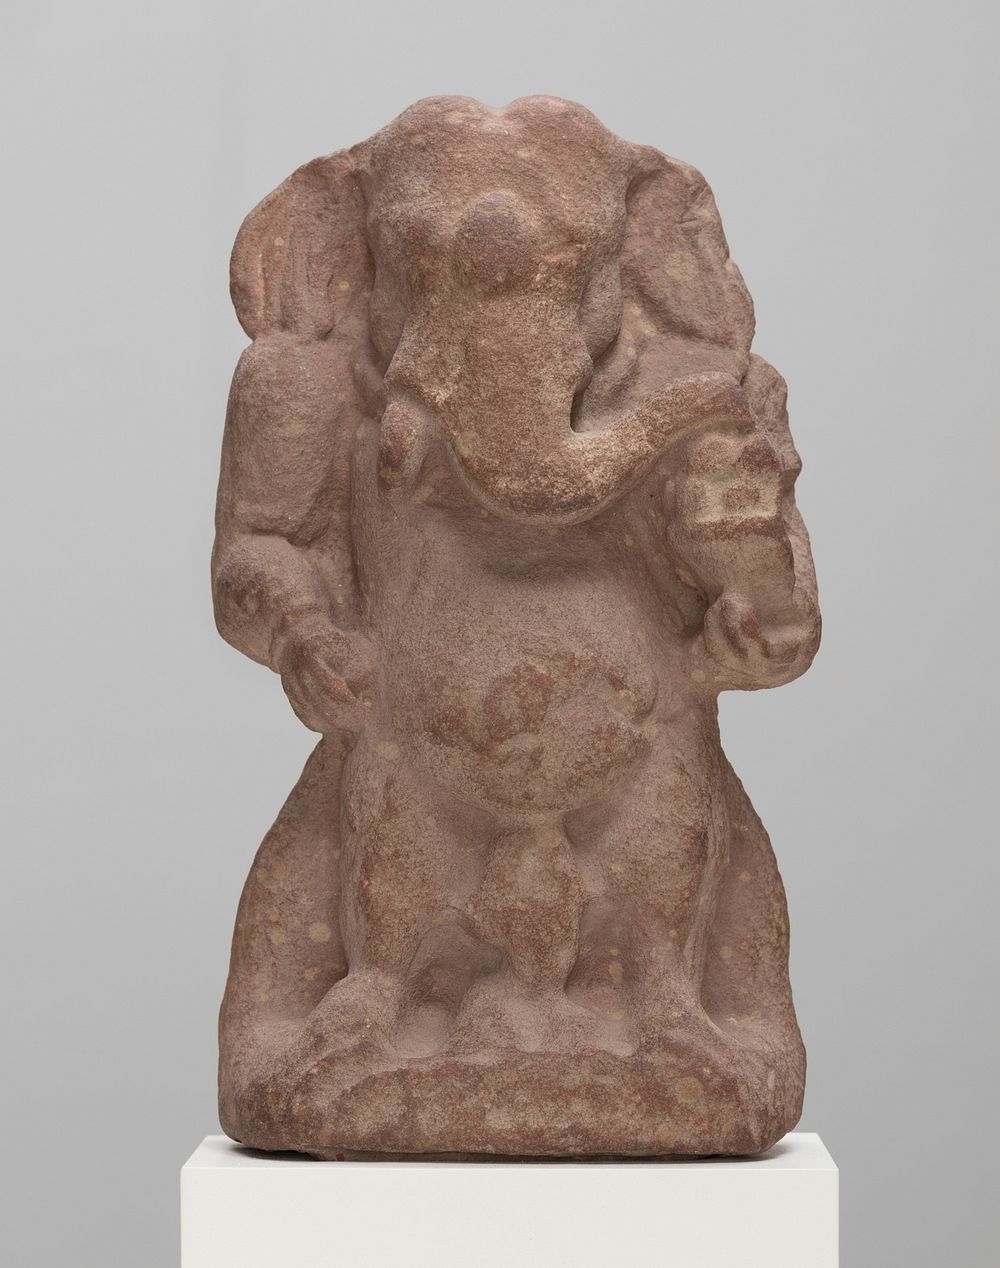 Two-Armed God Ganesha Holding a Bowl of Sweets